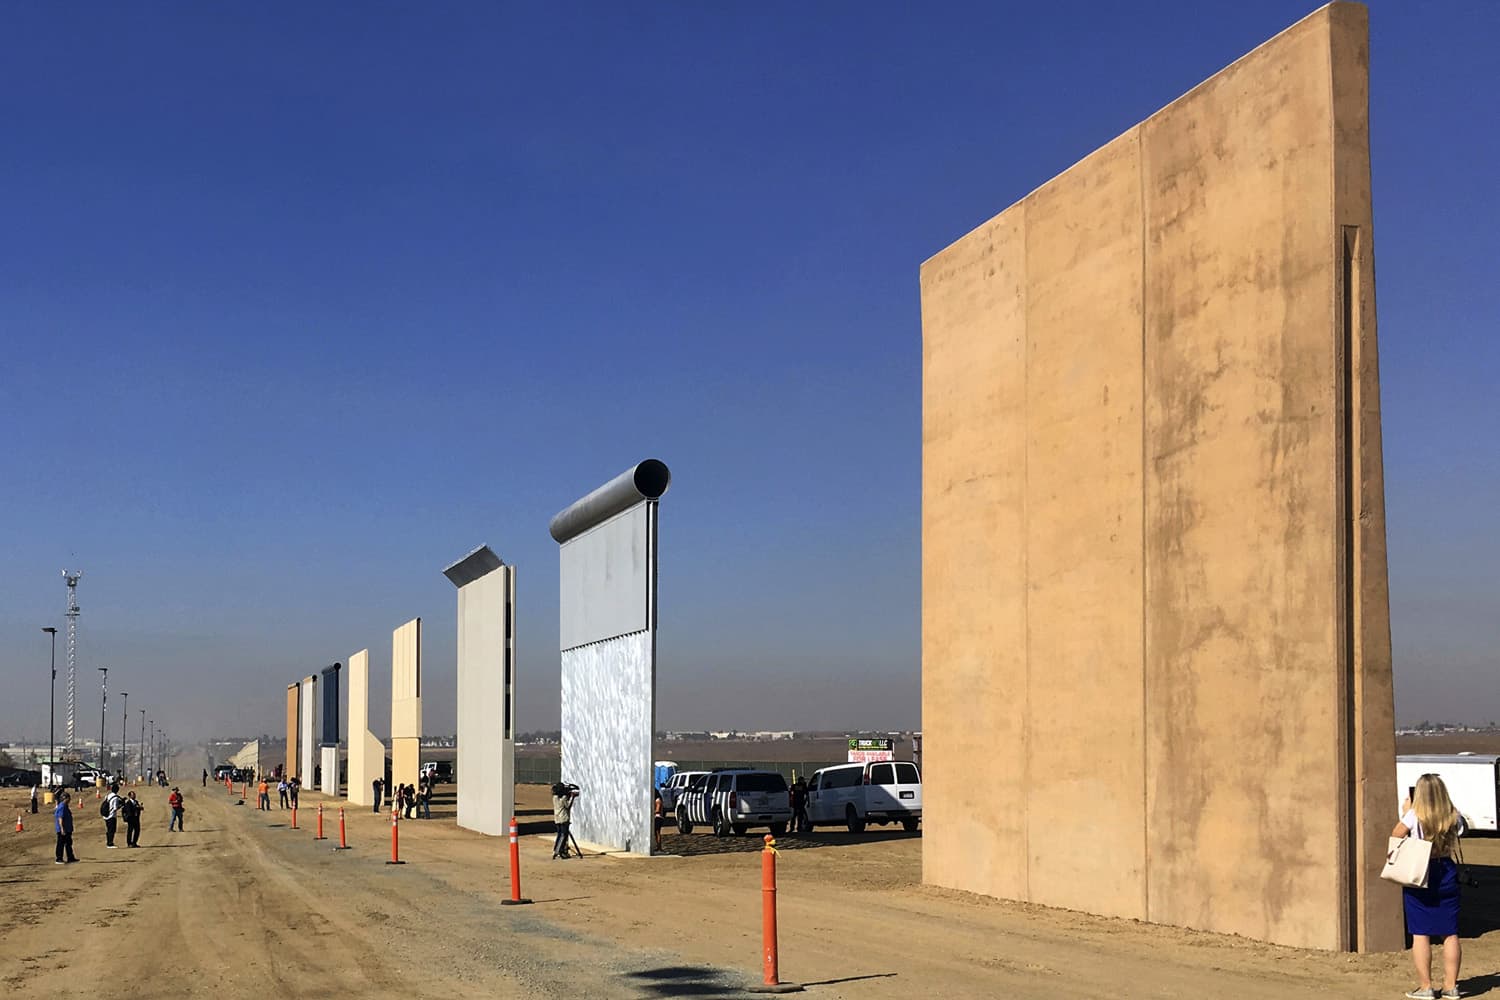 FILE - This Oct. 26, 2017 file photo shows prototypes of border walls in San Diego. A federal judge in San Diego who was taunted by Donald Trump during the presidential campaign has sided with the president on a challenge to building a border wall with Mexico. U.S. District Judge Gonzalo Curiel on Tuesday, Feb. 27, 2018 rejected arguments by the state of California and advocacy groups that the administration overreached by waiving laws requiring environmental and other reviews before construction could begin. (AP Photo/Elliott Spagat, File)